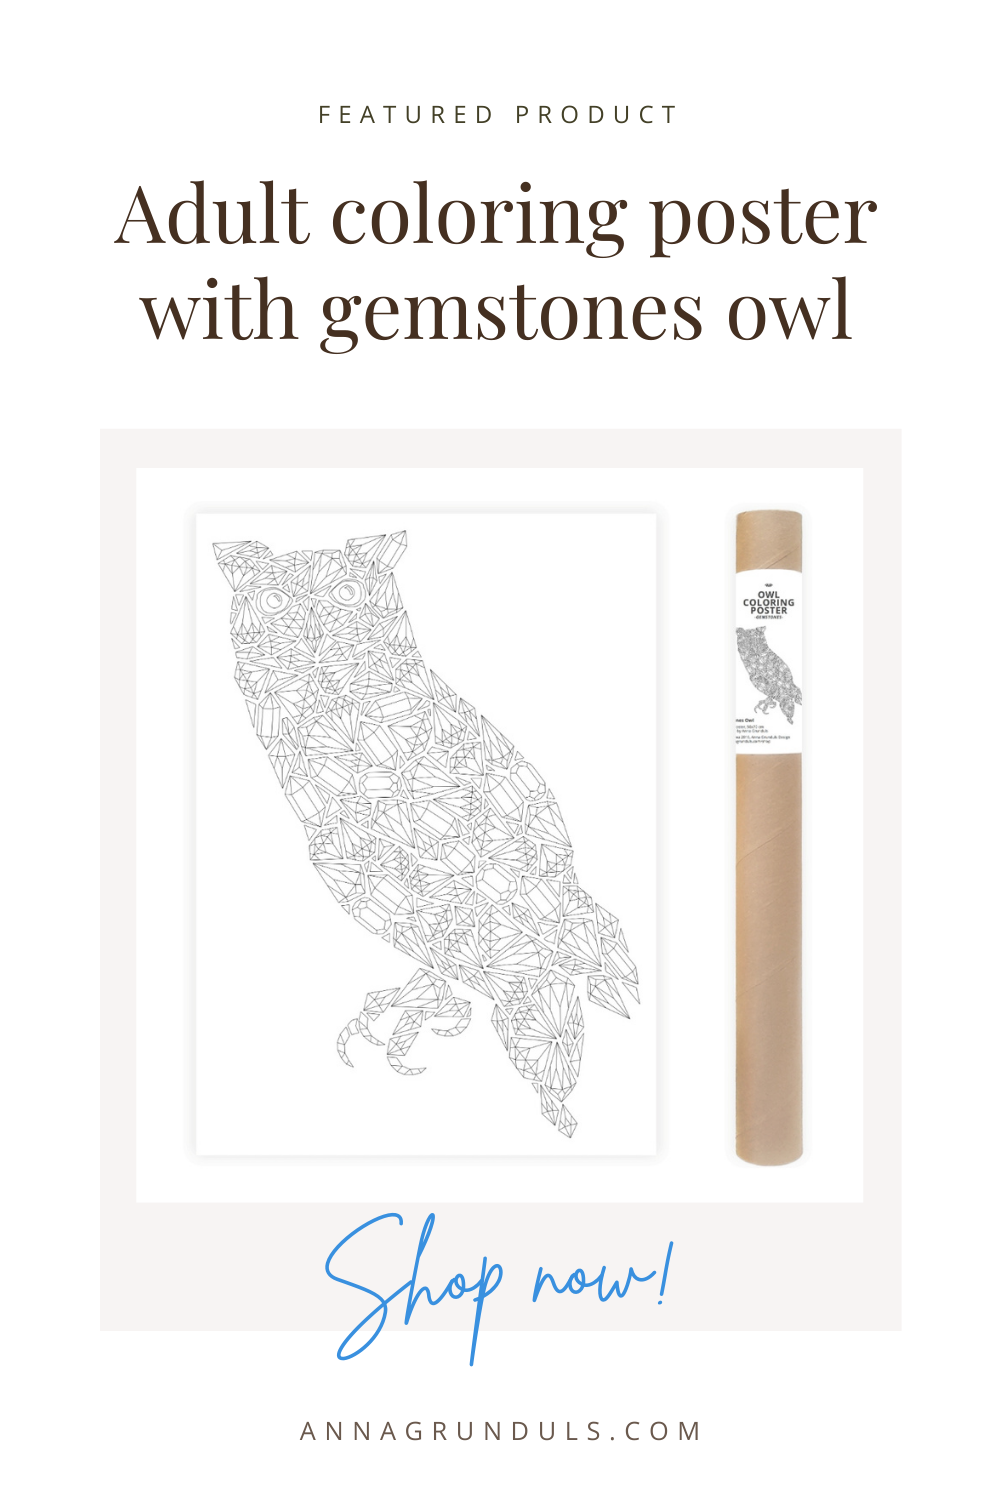 gemstones owl poster for adult coloring pinterest pin